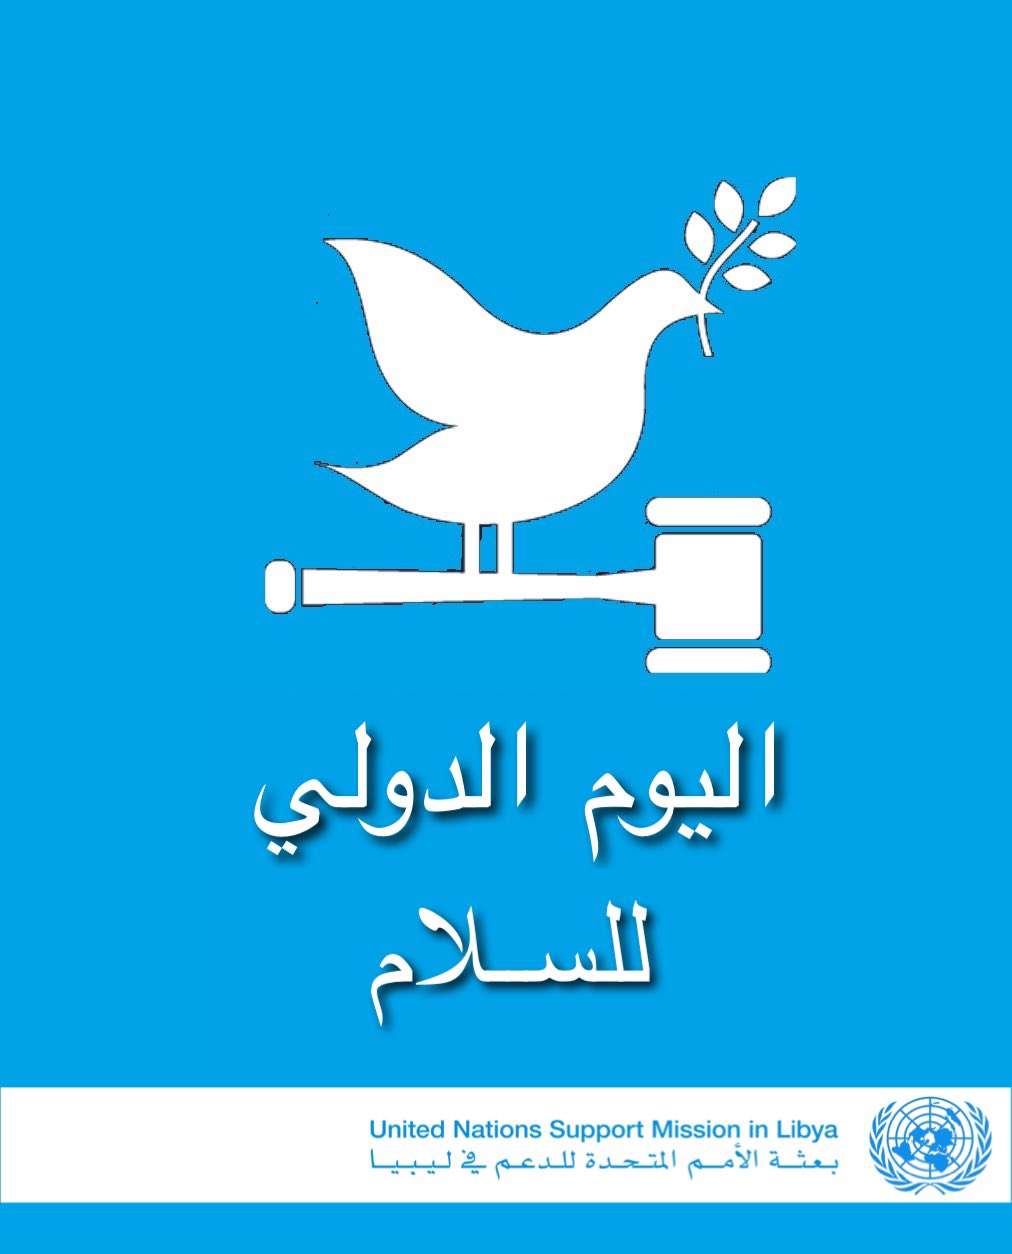 On the occasion of the International Day of Peace, the UN mission expresses its commitment to achieving peace in Libya through an inclusive process led and led by Libyans.